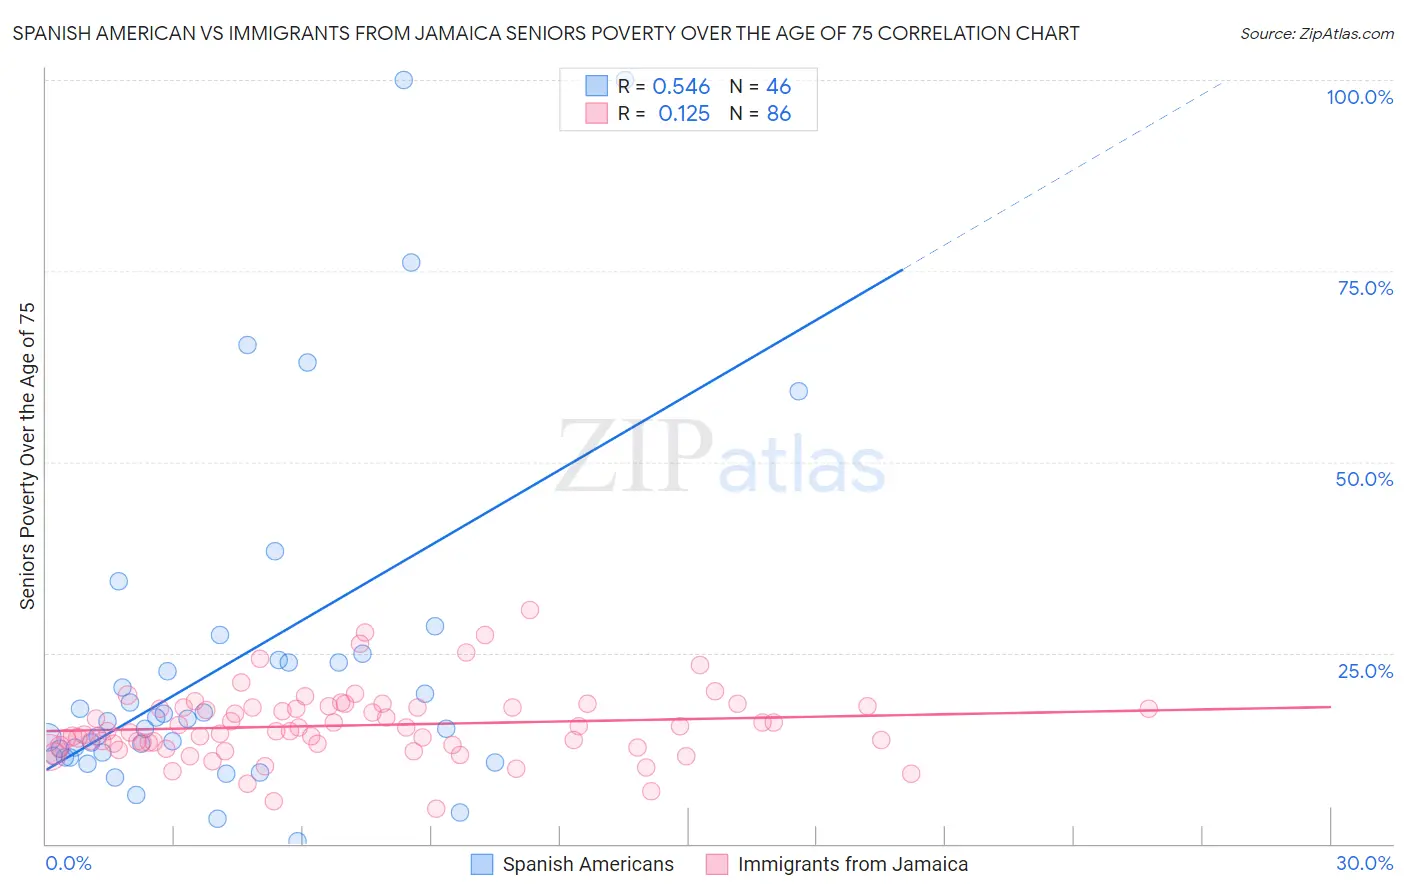 Spanish American vs Immigrants from Jamaica Seniors Poverty Over the Age of 75